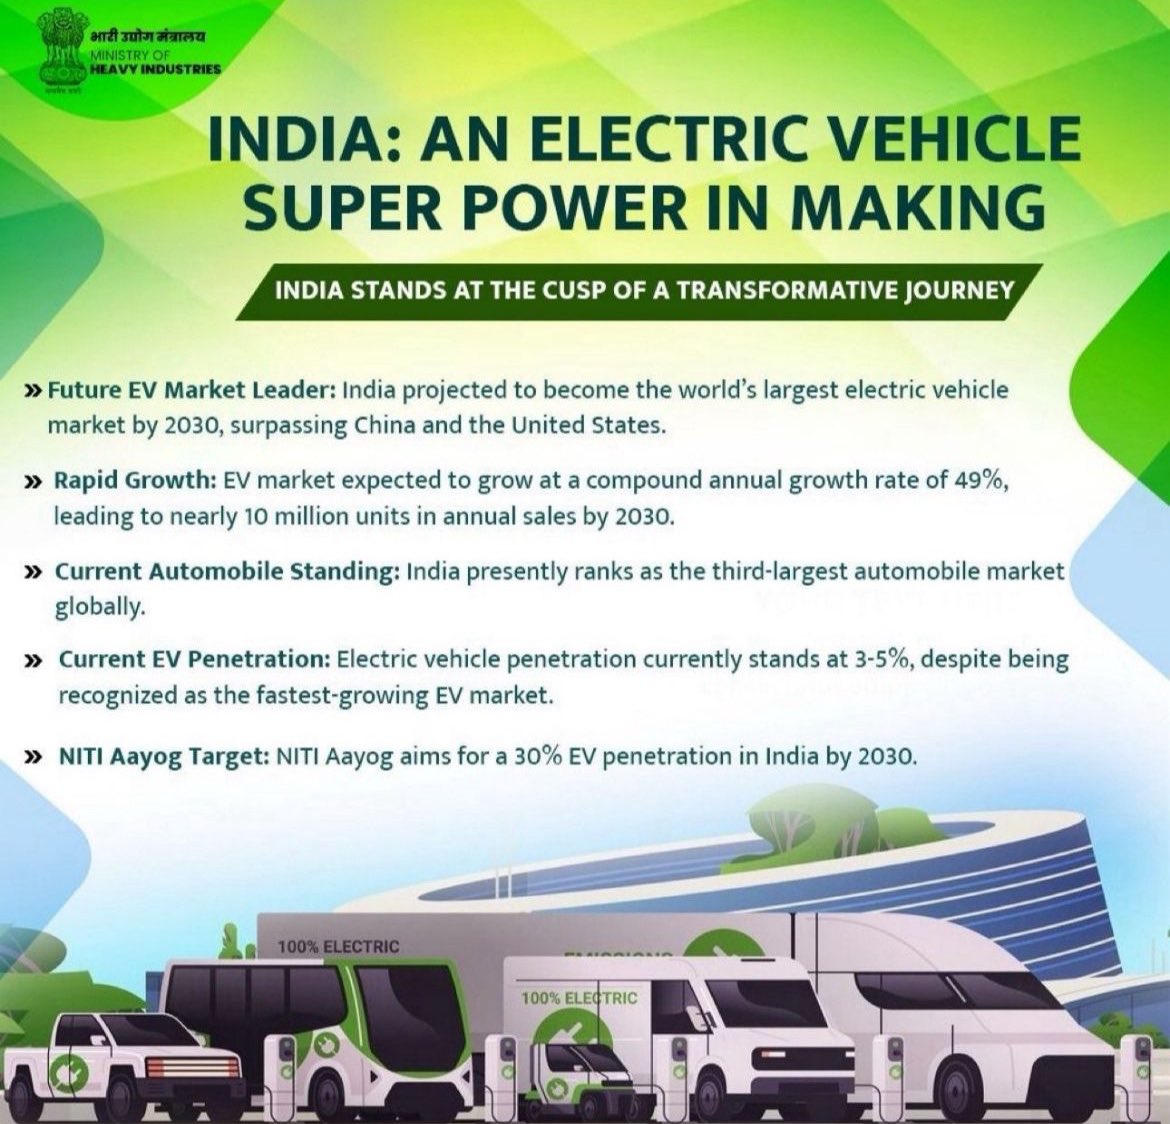 India is on the cusp of becoming the global leader in #electricalvehicles (EVs), charting a transformative path towards a sustainable automotive future.